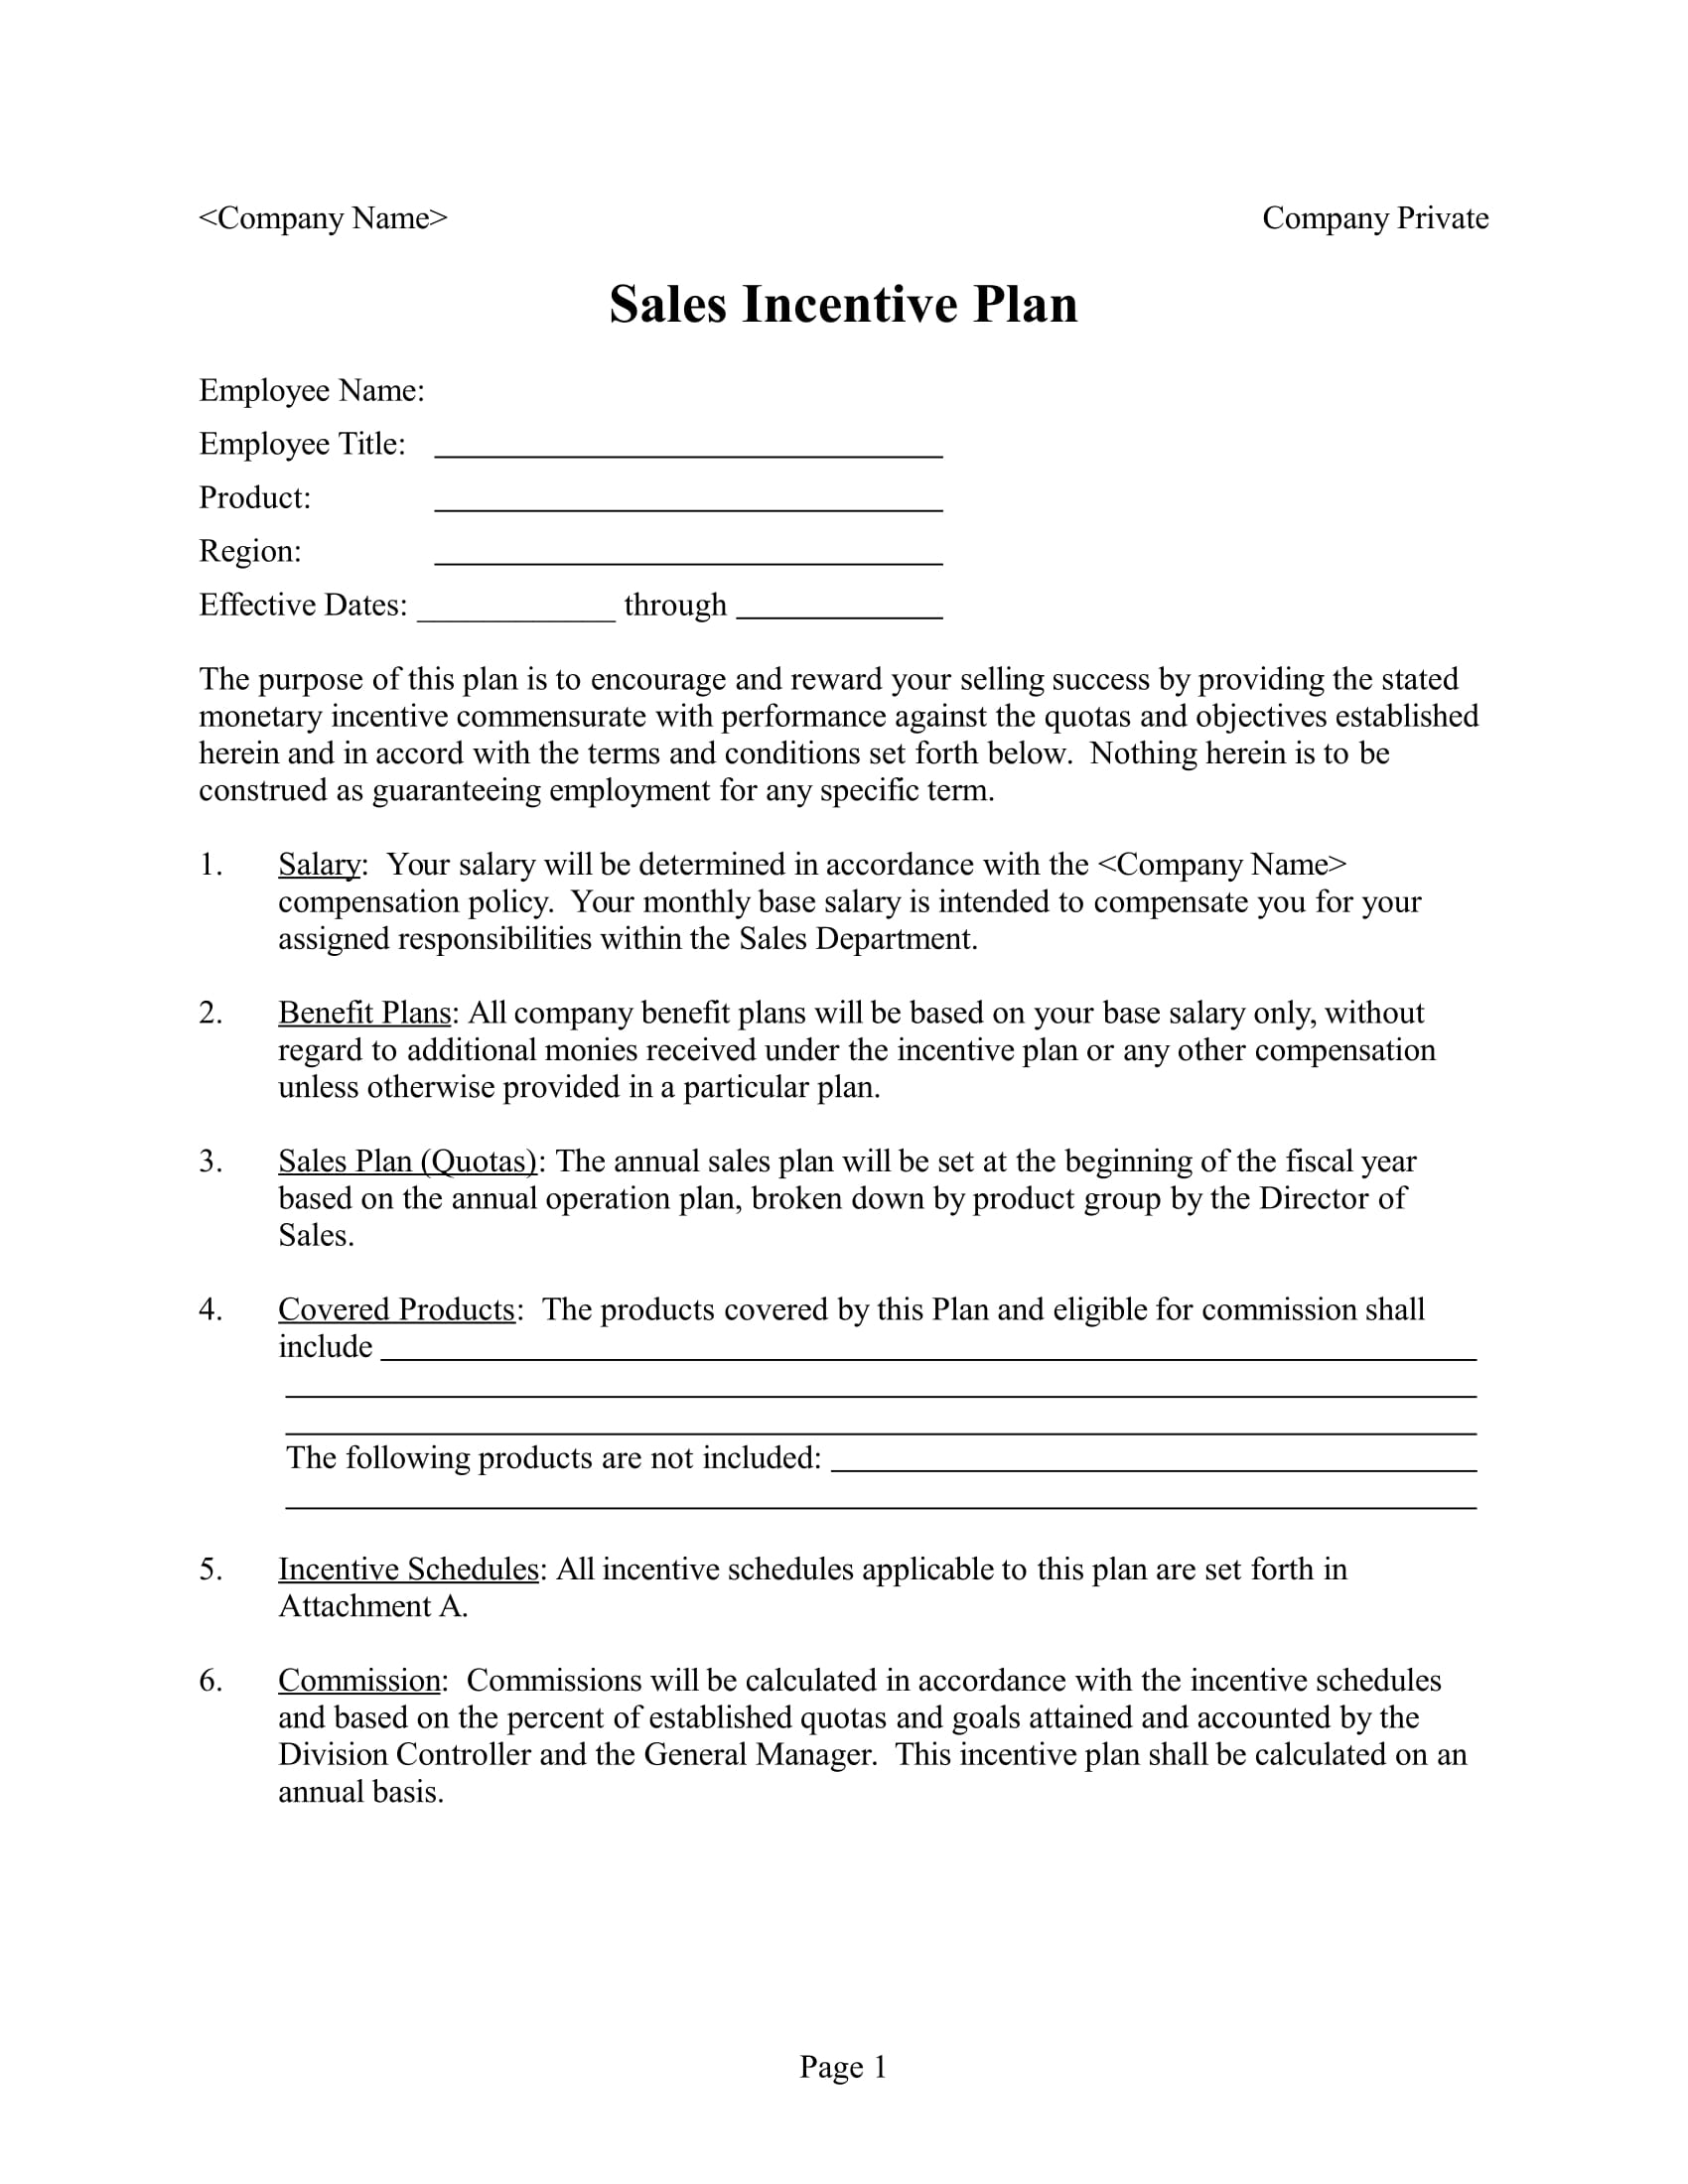 simple sales incentive plan example